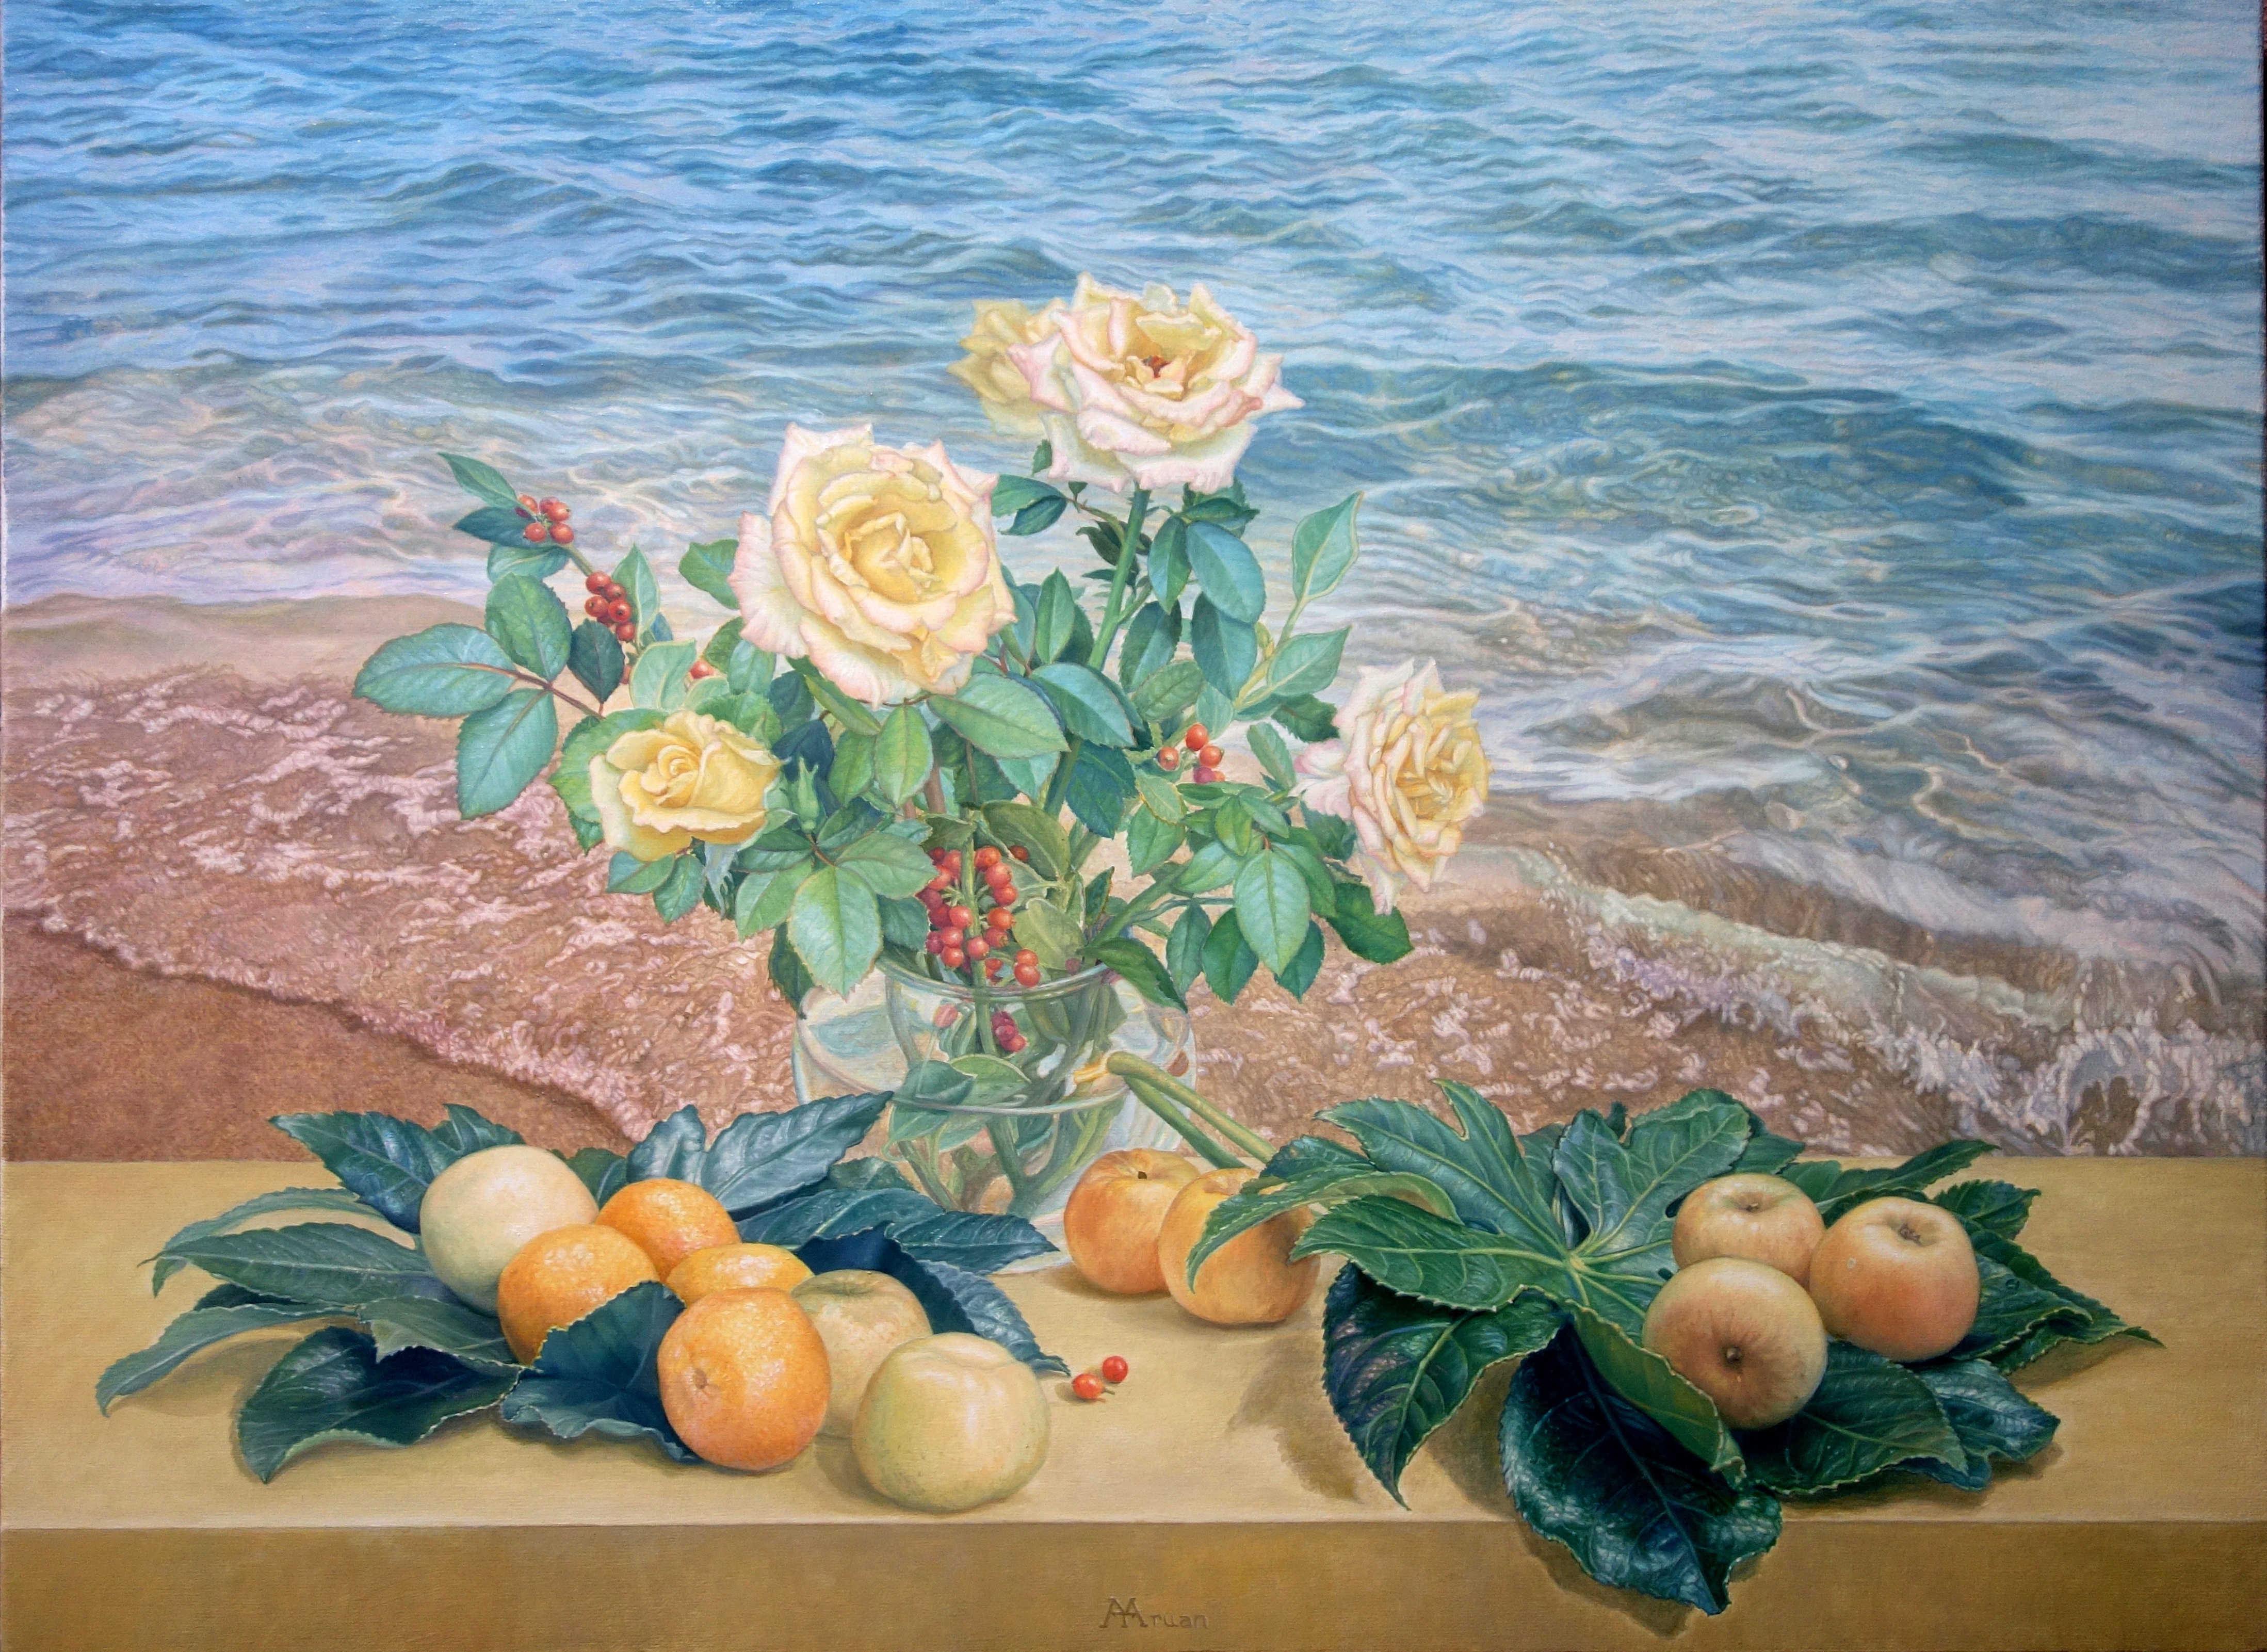 Roses, apples and ardisias in Les Marines,2018, oil on canvas, 21.2x28.7in.